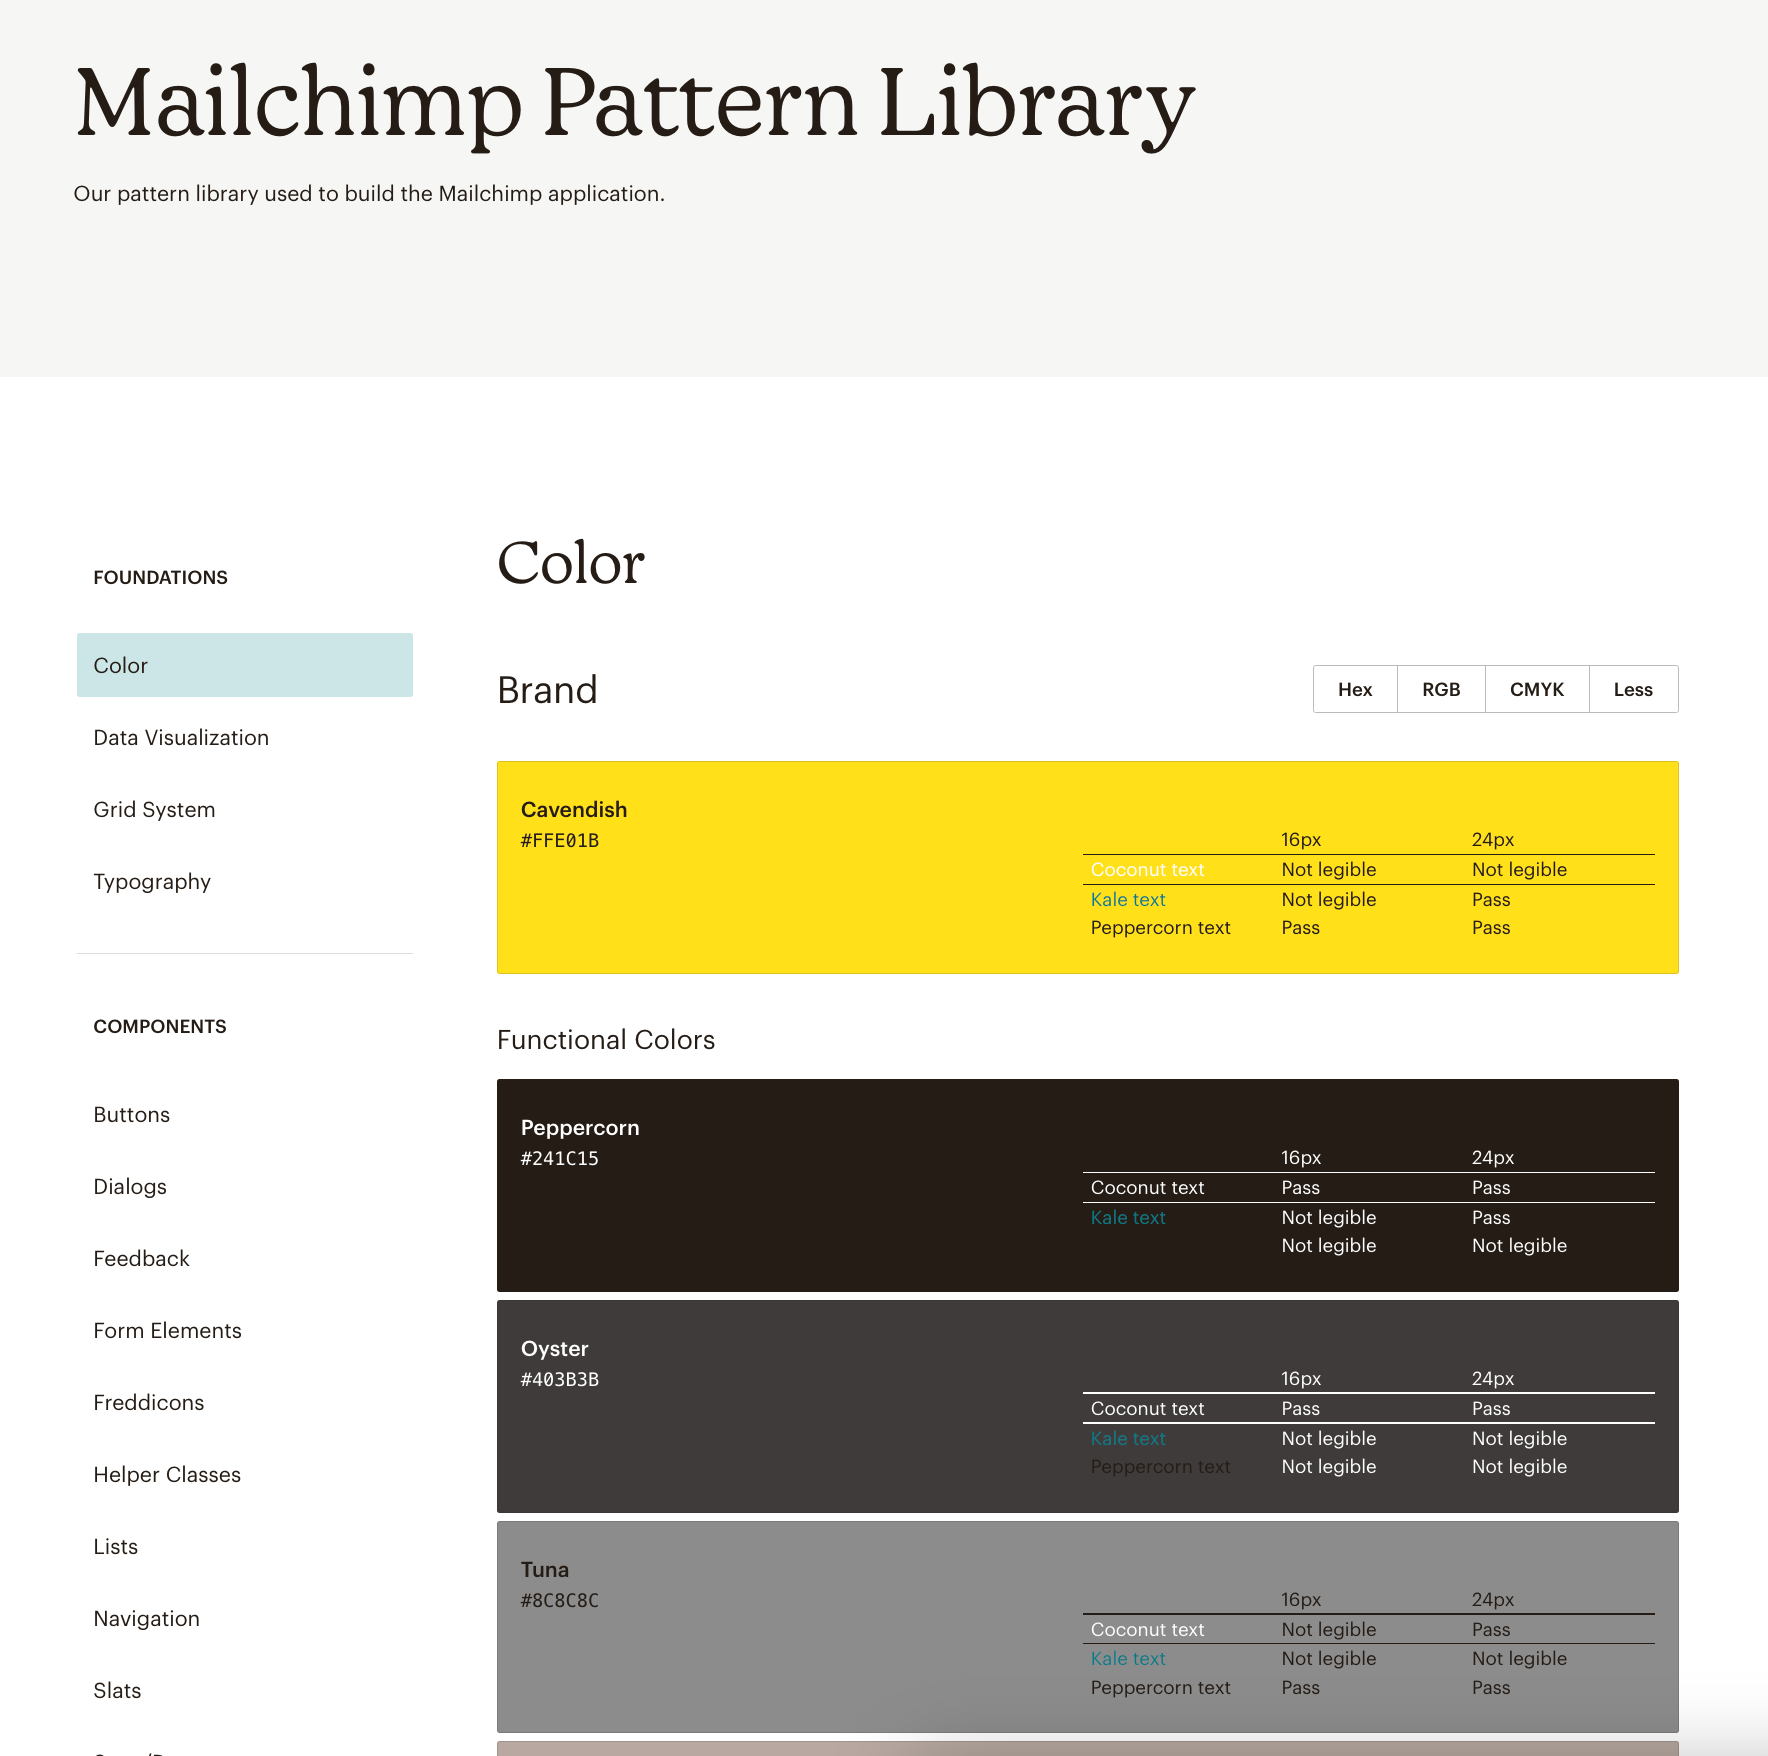 A screenshot of Mailchimp's Pattern Library